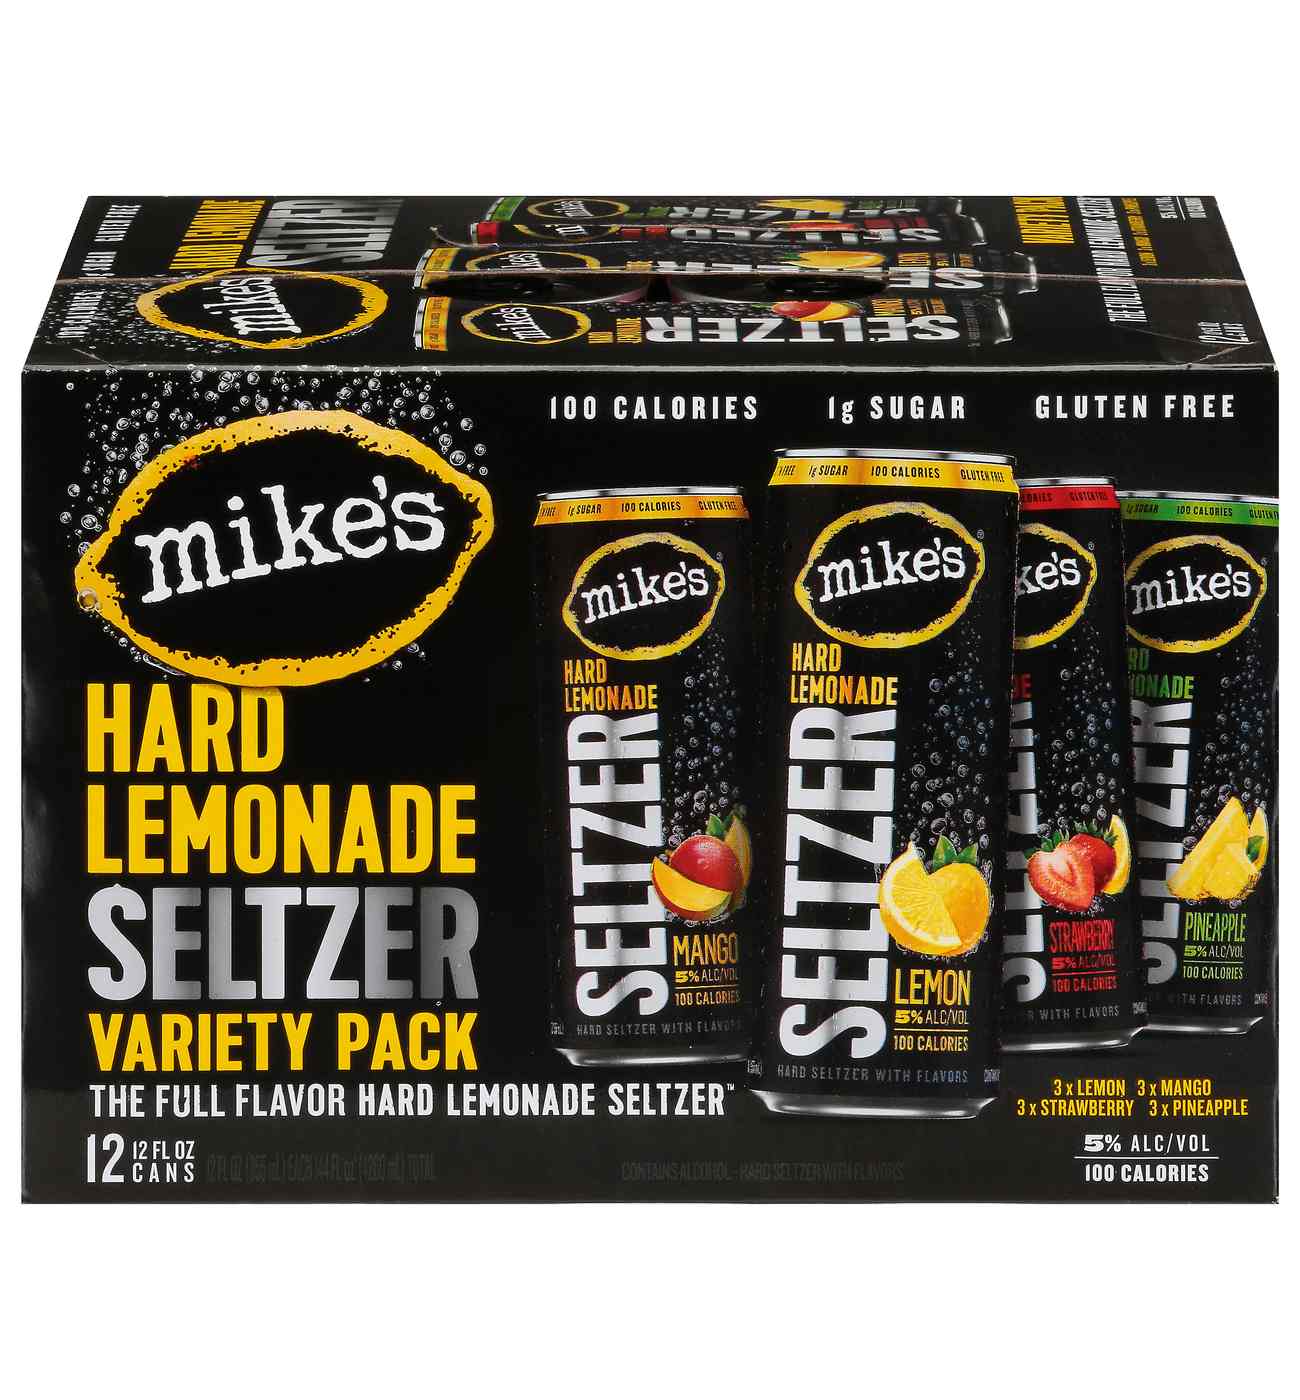 Mike's Hard Lemonade Seltzer Variety Pack 12 oz Cans; image 1 of 2